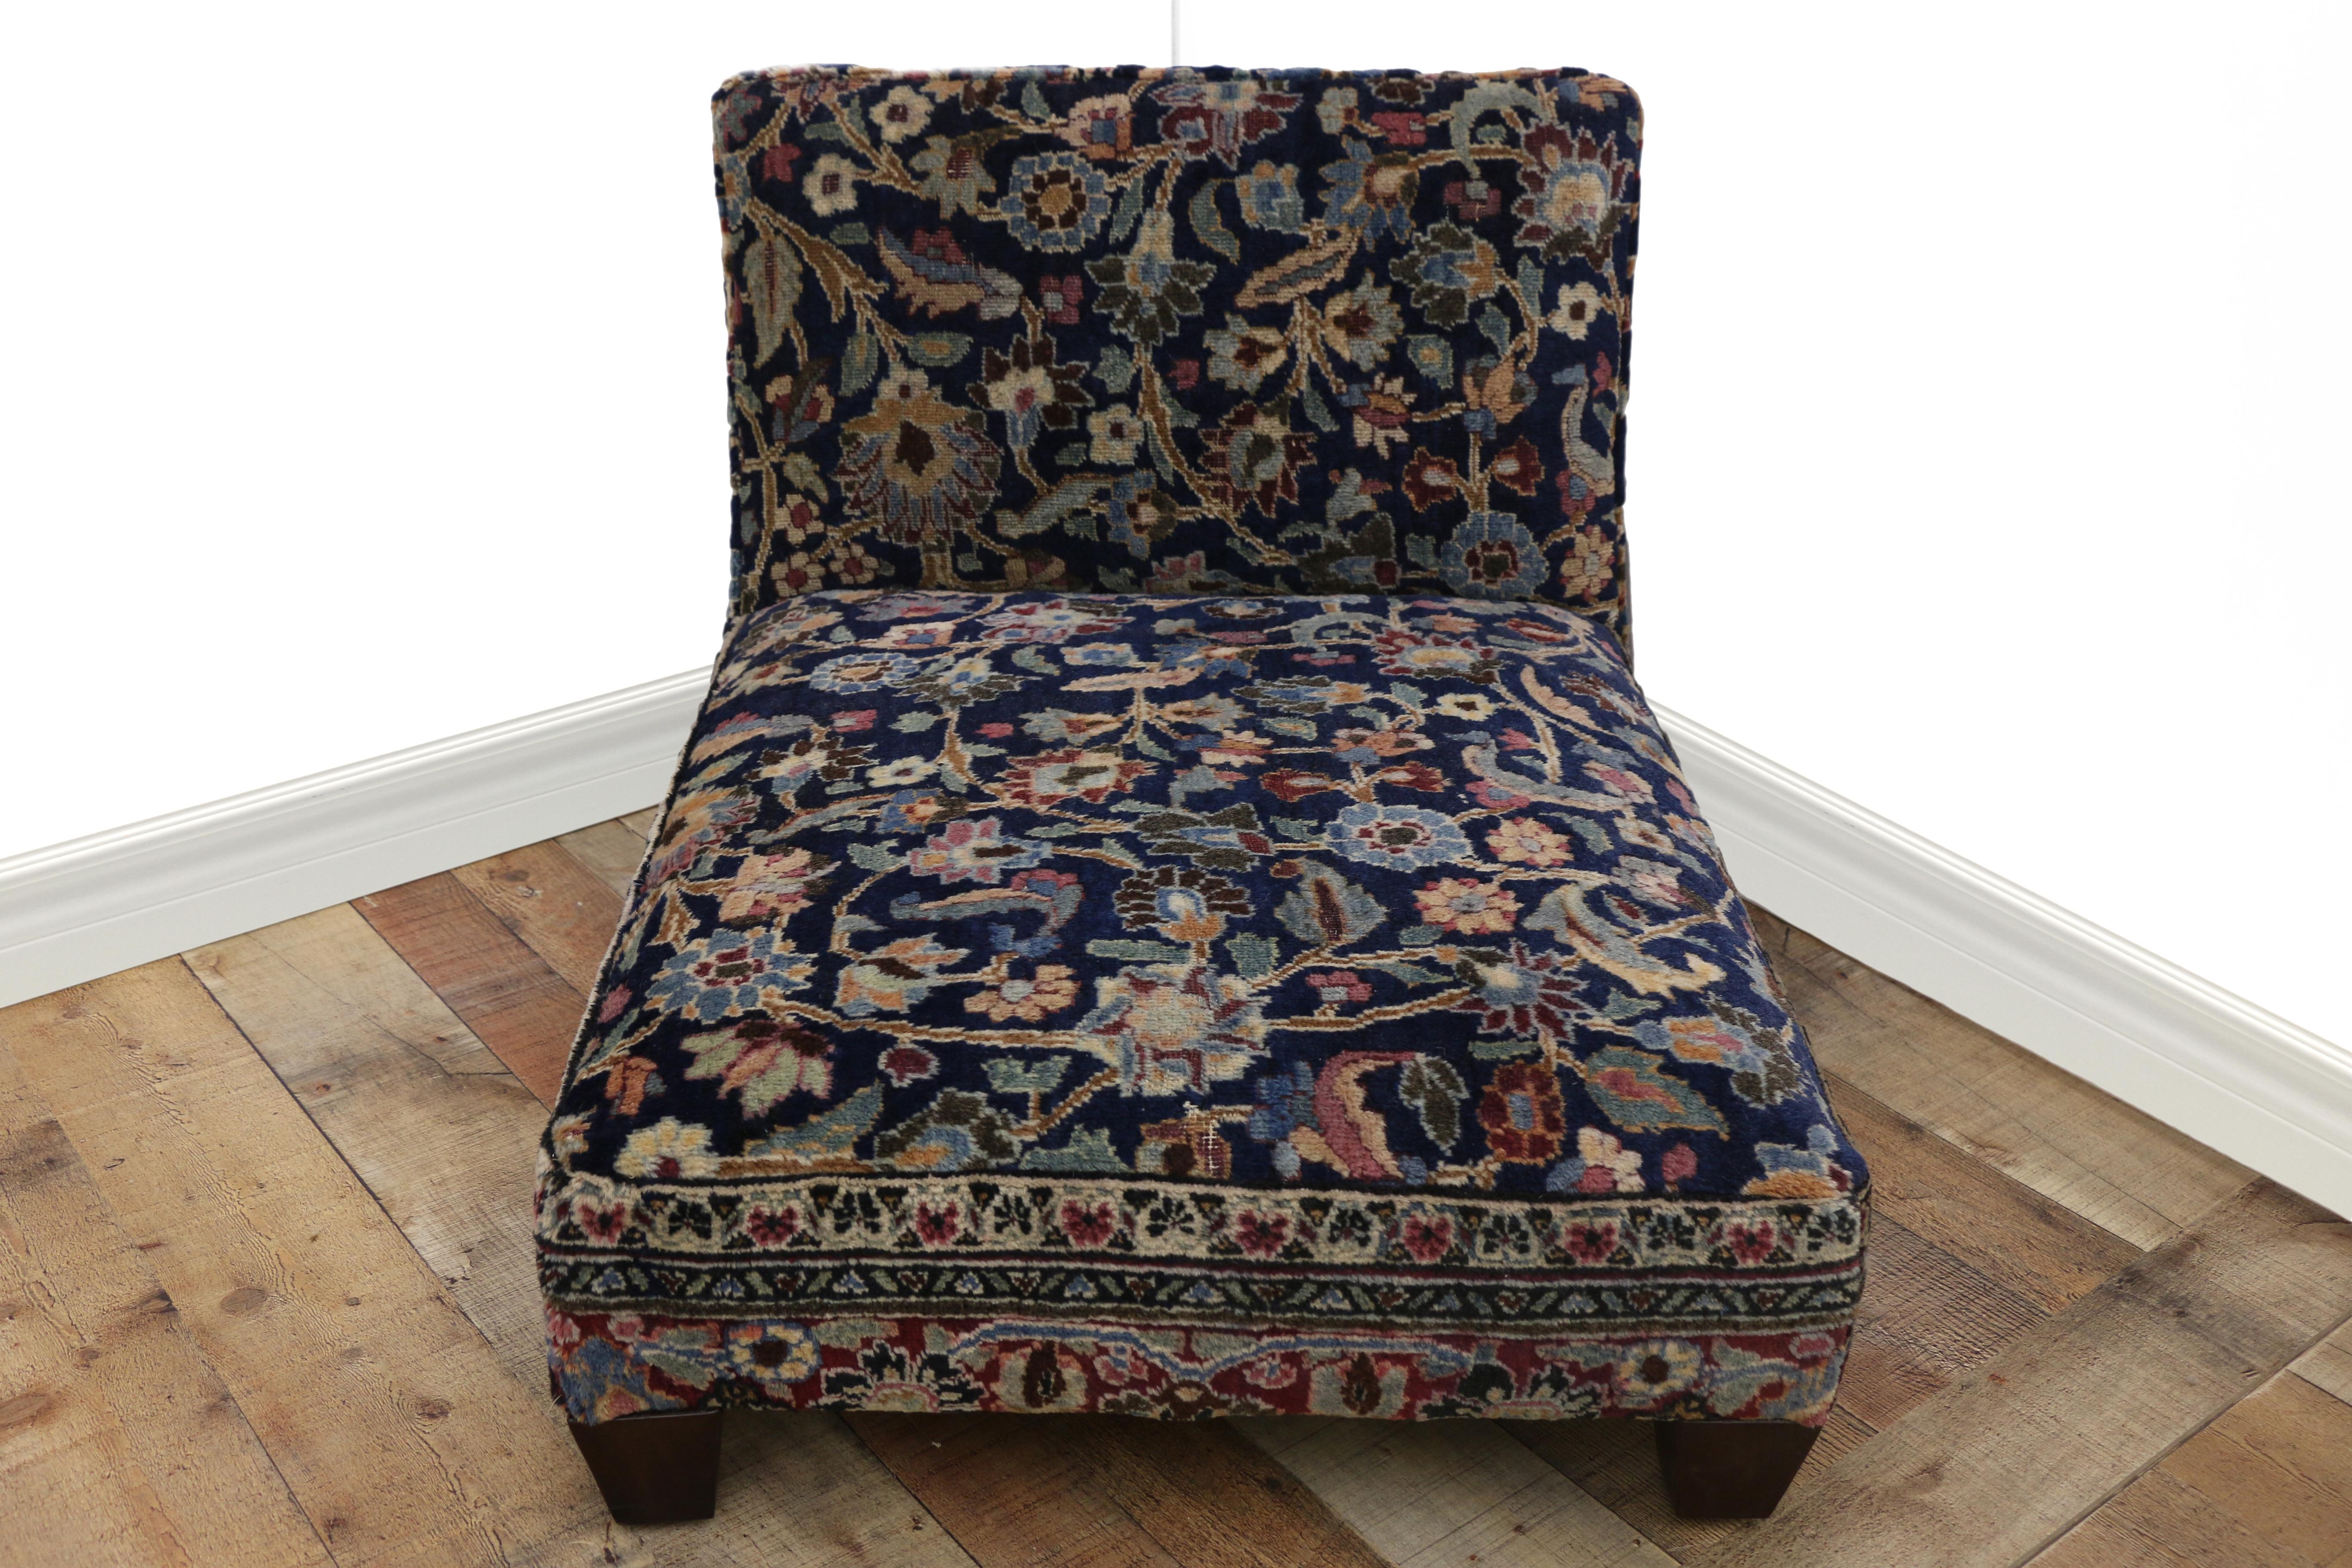 Low Profile Slipper Chair or Persian Petbed from Antique Persian Khorassan Rug 1